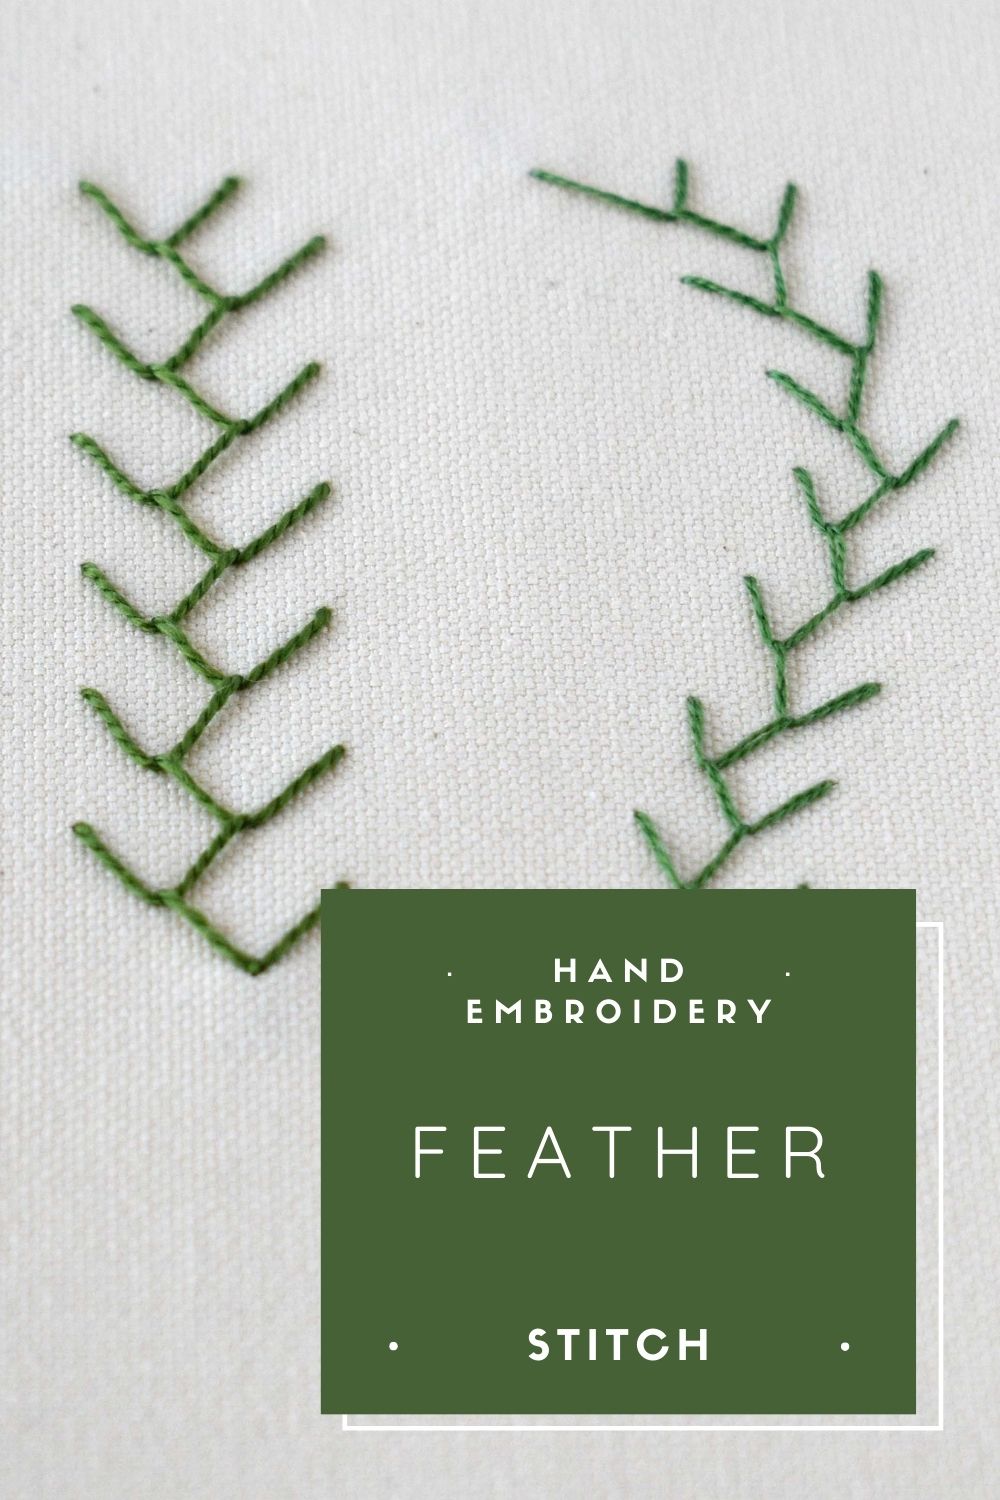 Master Feather Stitch in Easy Steps!